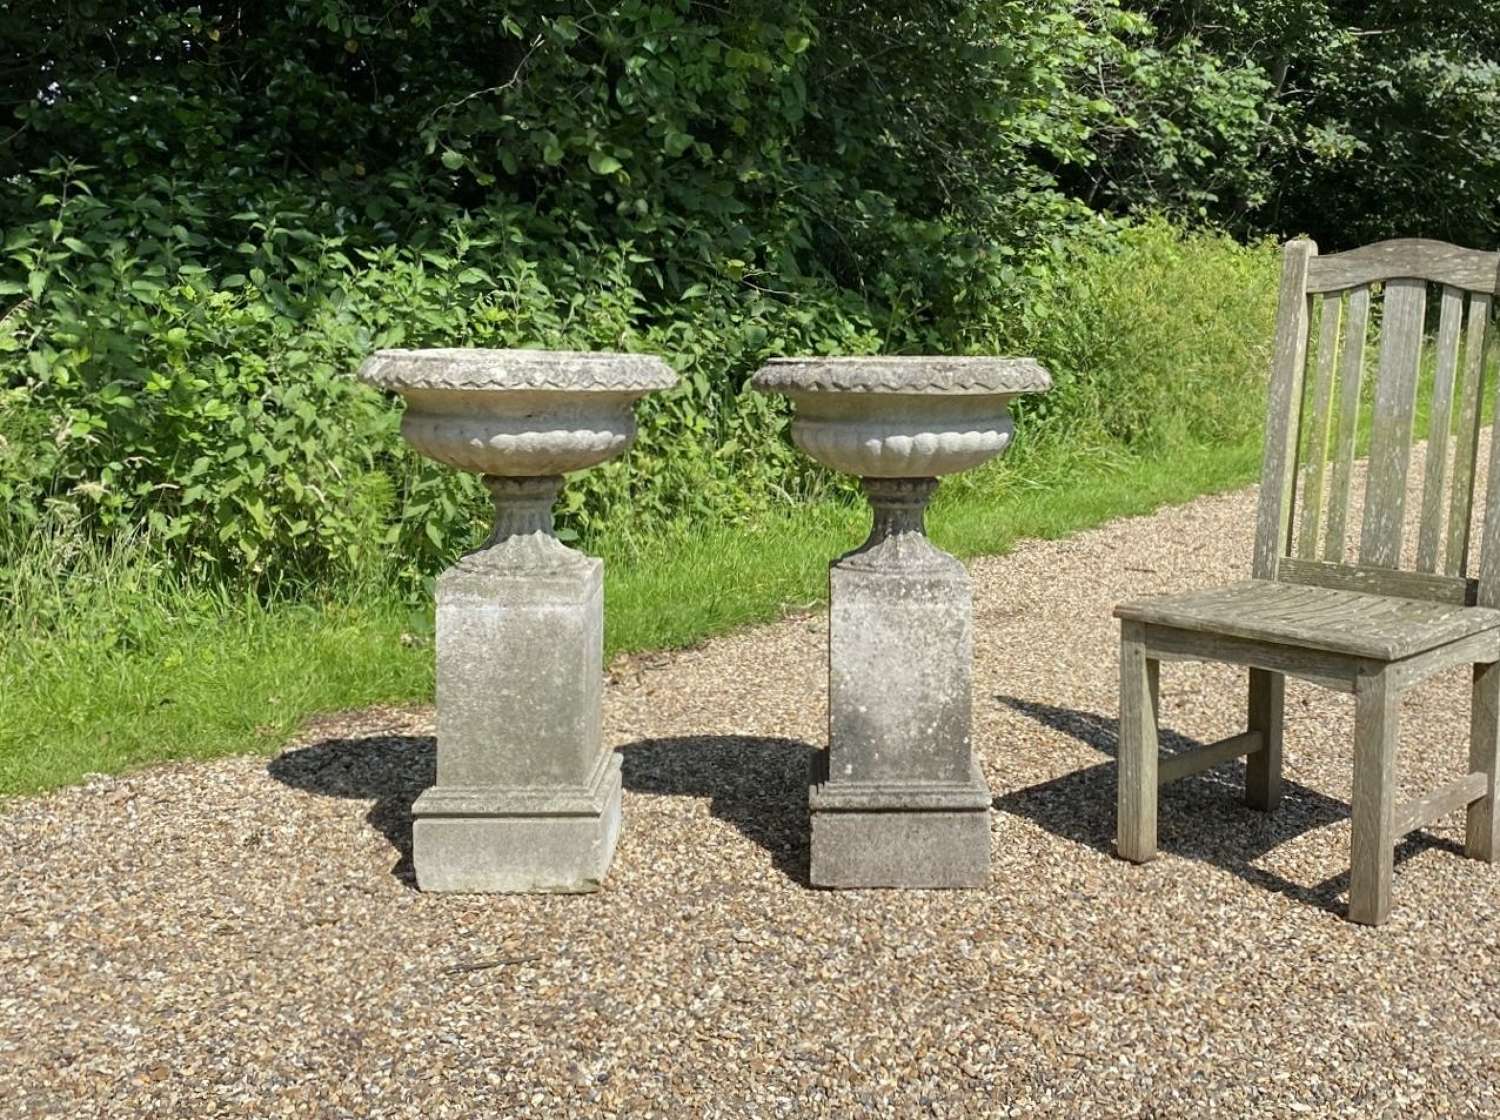 Pair of Small Classic Urns with Pedestals